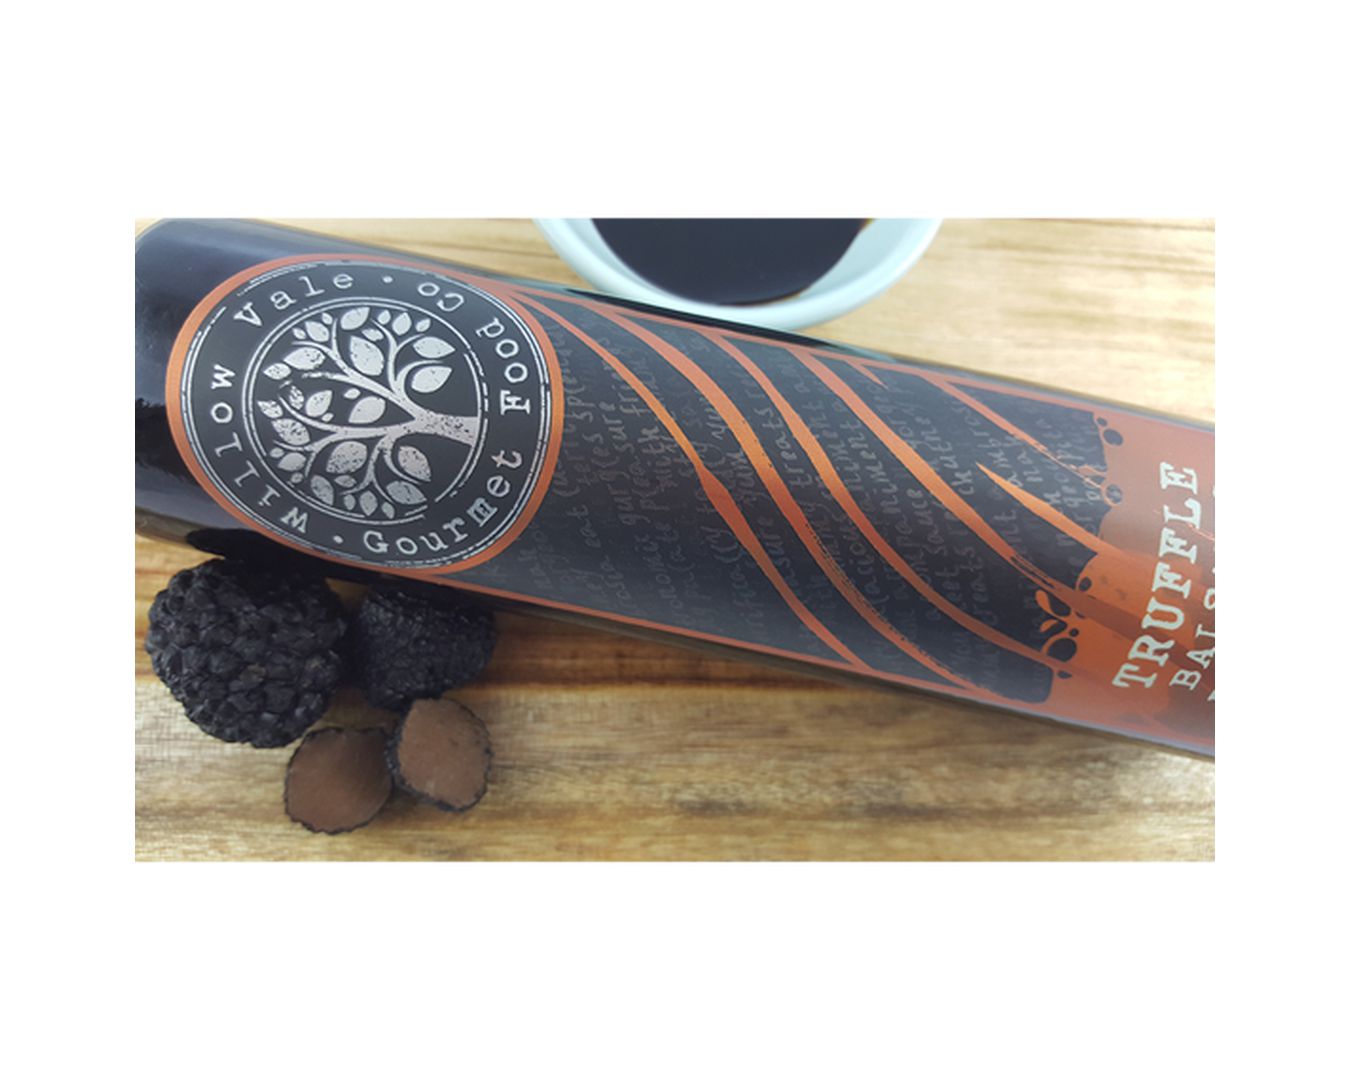 Willow Vale Truff Balsamic Reduction 250ml-Balsamic-The Local Basket